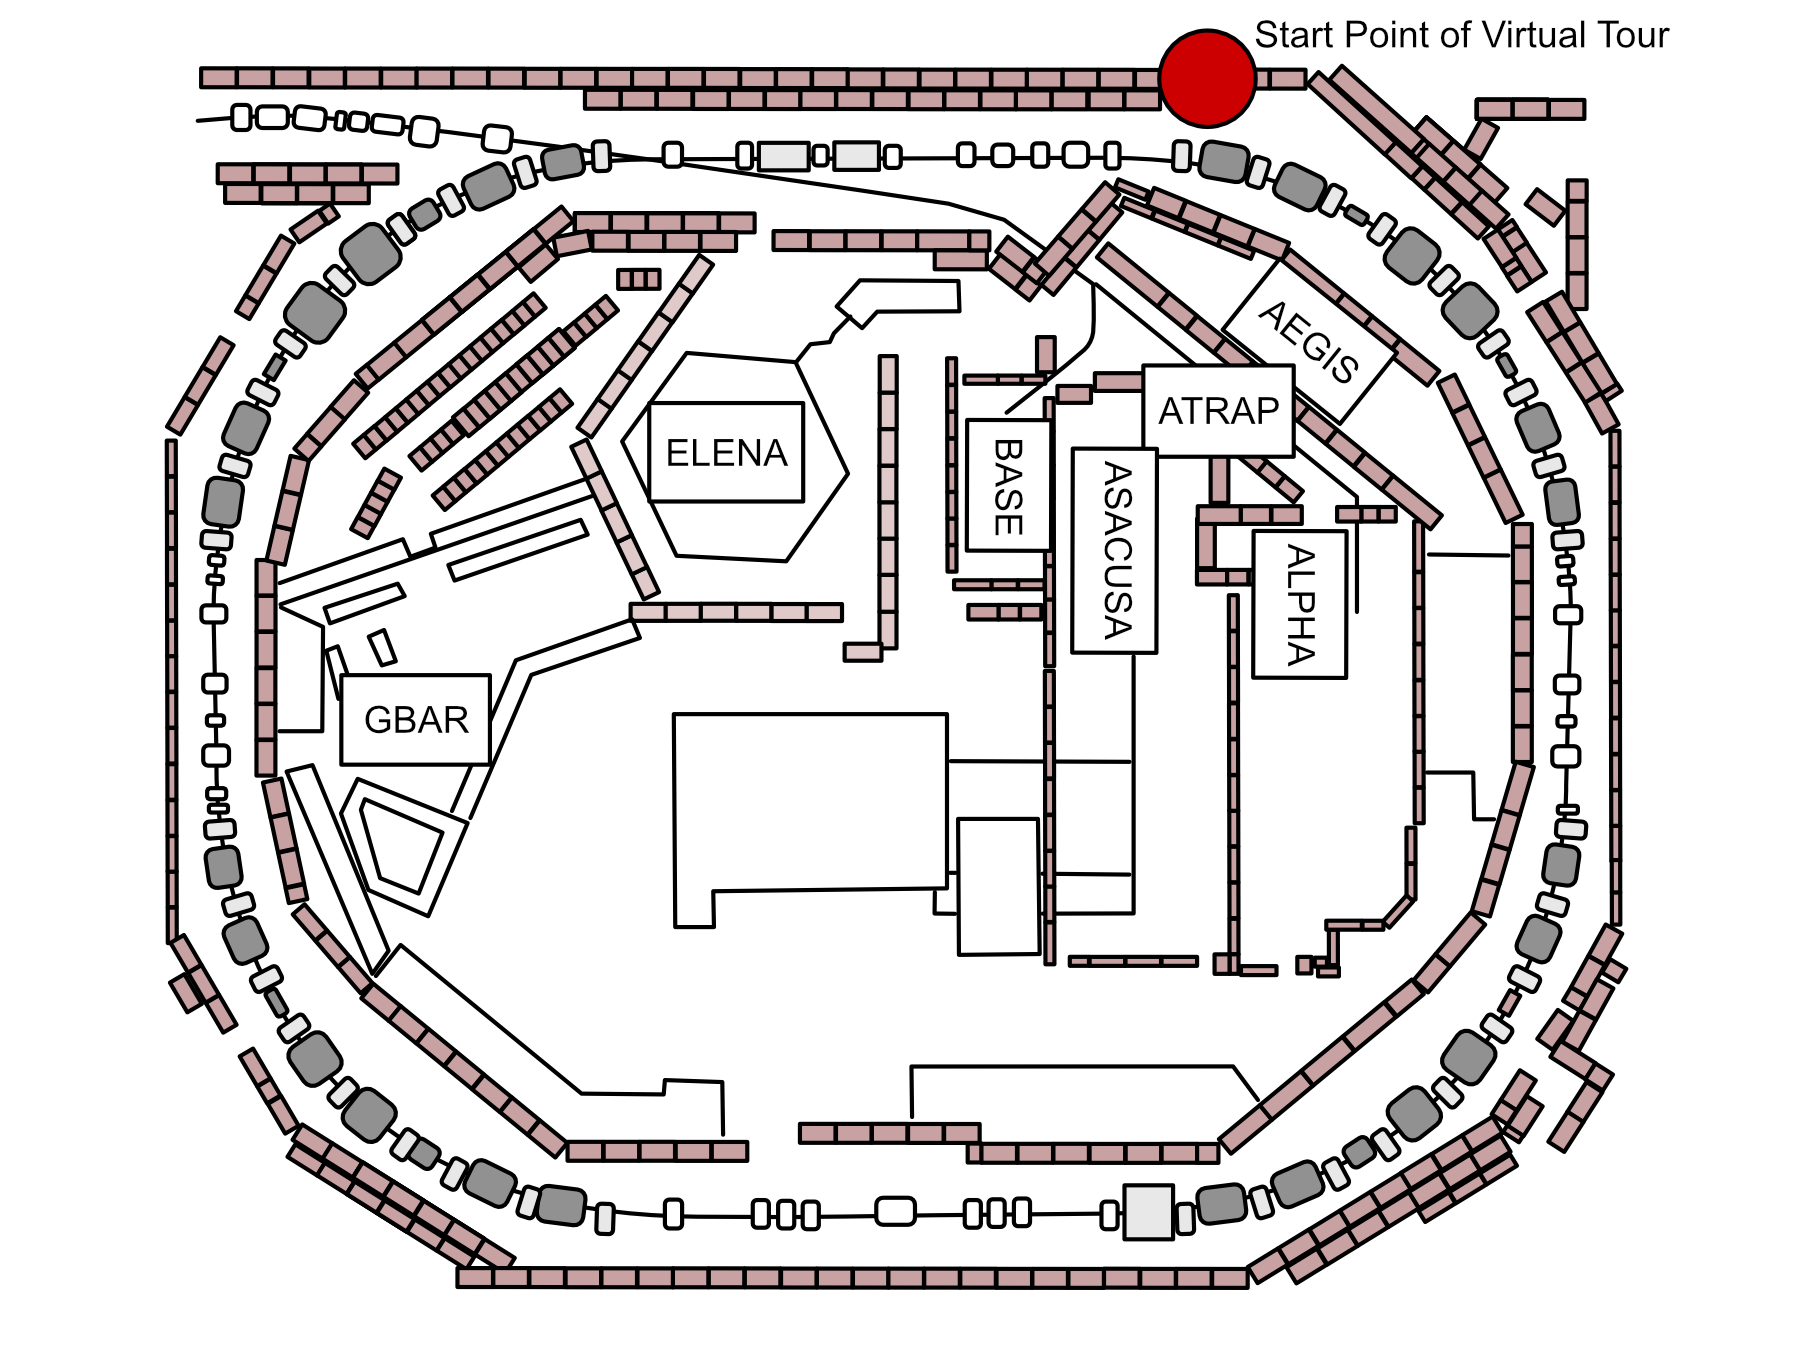 Schematic Graphic of the AD Hall, adapted by the ELENA Project